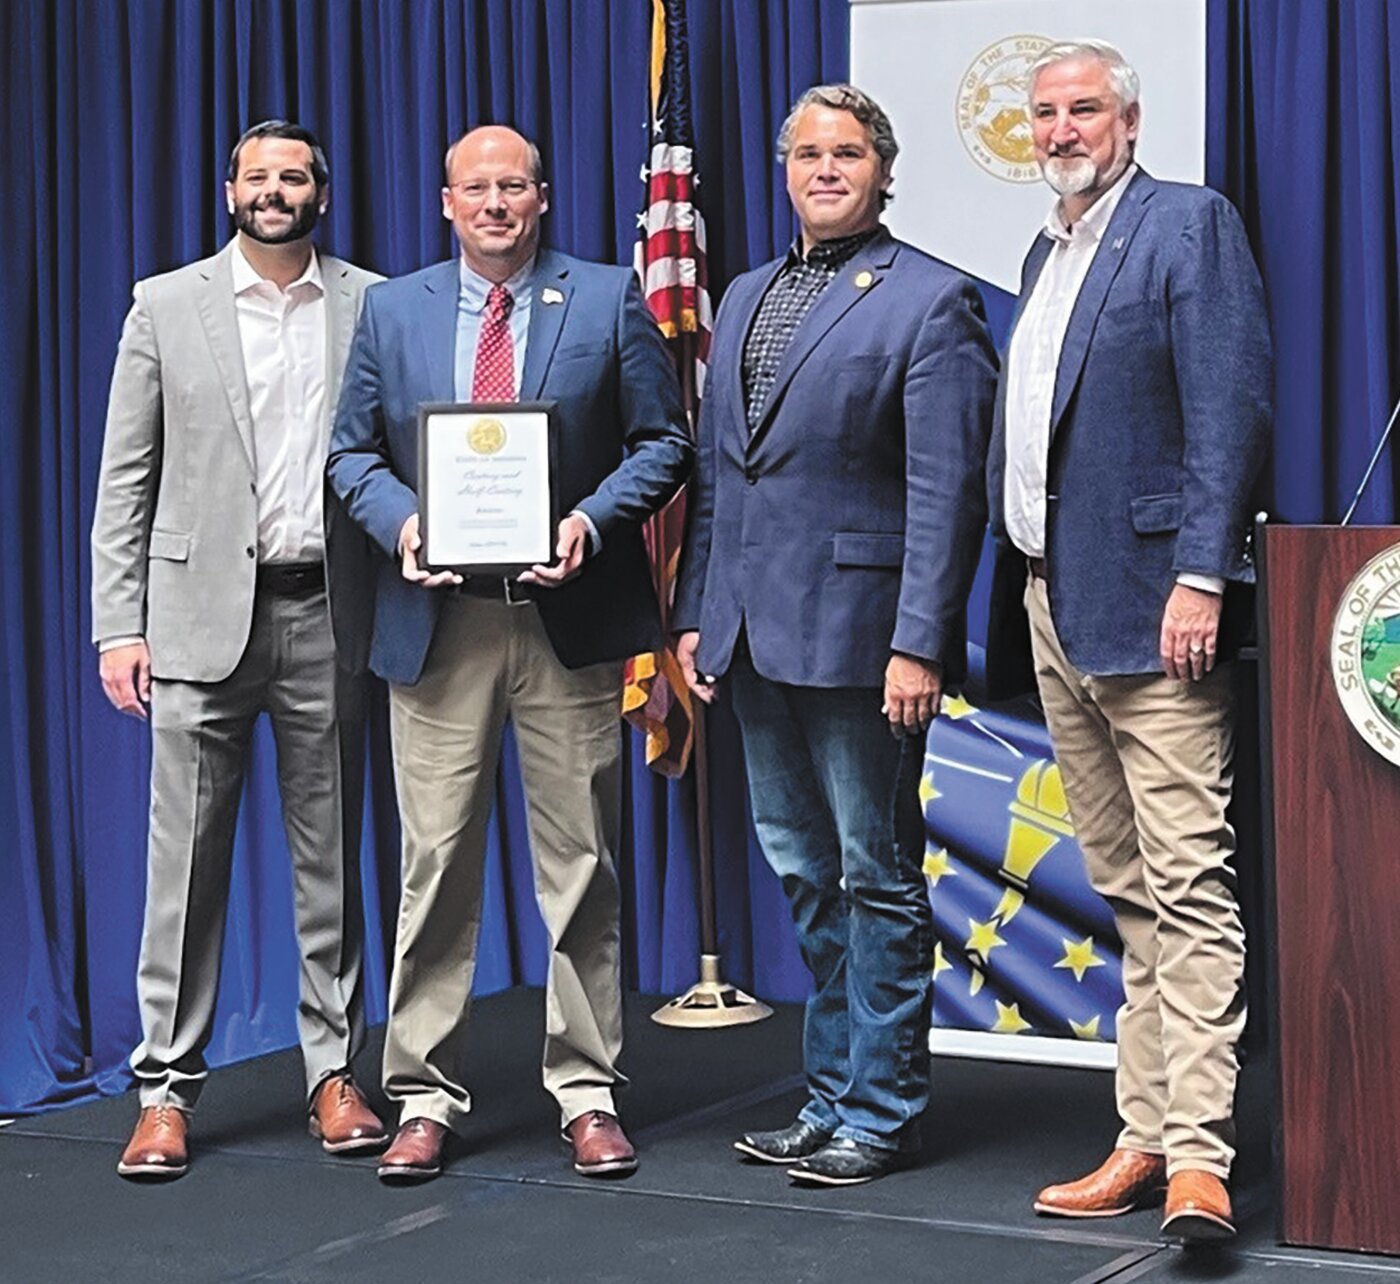 Pictured from left are David Rosenberg, IEDC Chief Operating Officer and Chief of Staff, Matt Howrey, North Salem State Bank President and CEO, Beau Baird, State Representative District 44 and Indiana Gov. Eric Holcomb.